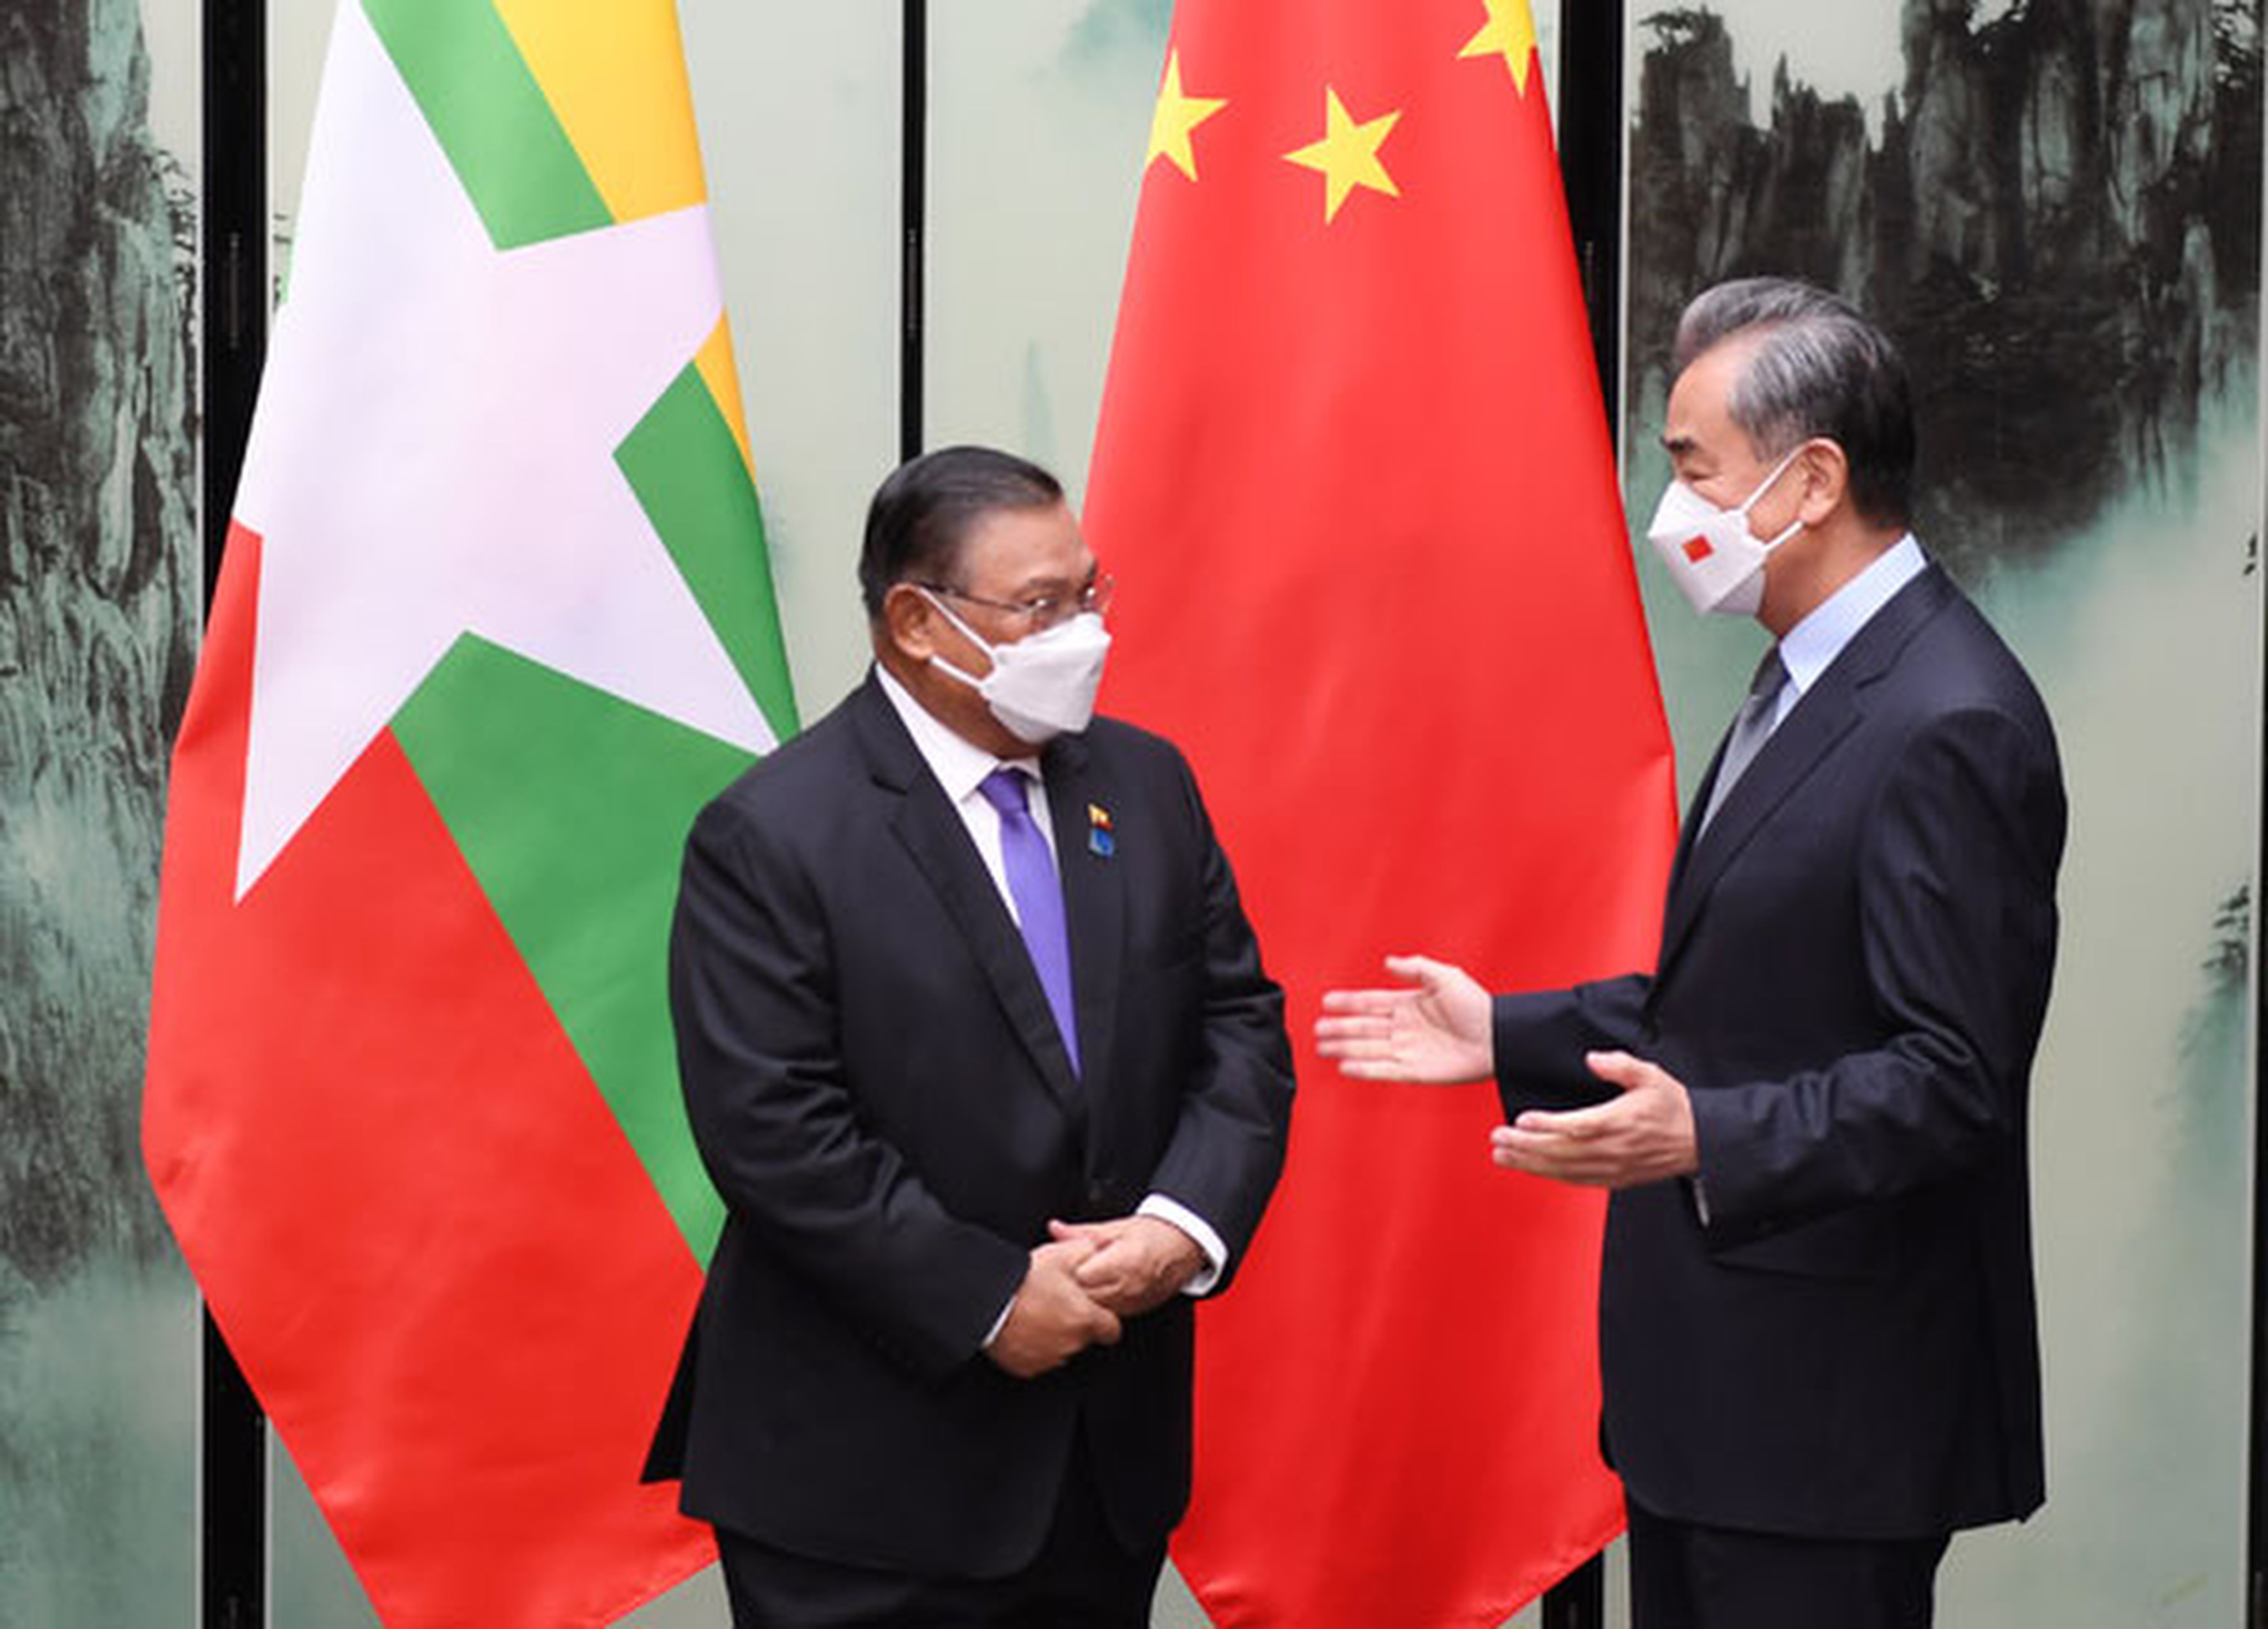 Beijing has maintained a relationship with Naypyidaw after last year’s coup, highlighted by Foreign Minister Wang Yi meeting counterpart U Wunna Maung Lwin in April. Photo: Ministry of Foreign Affairs